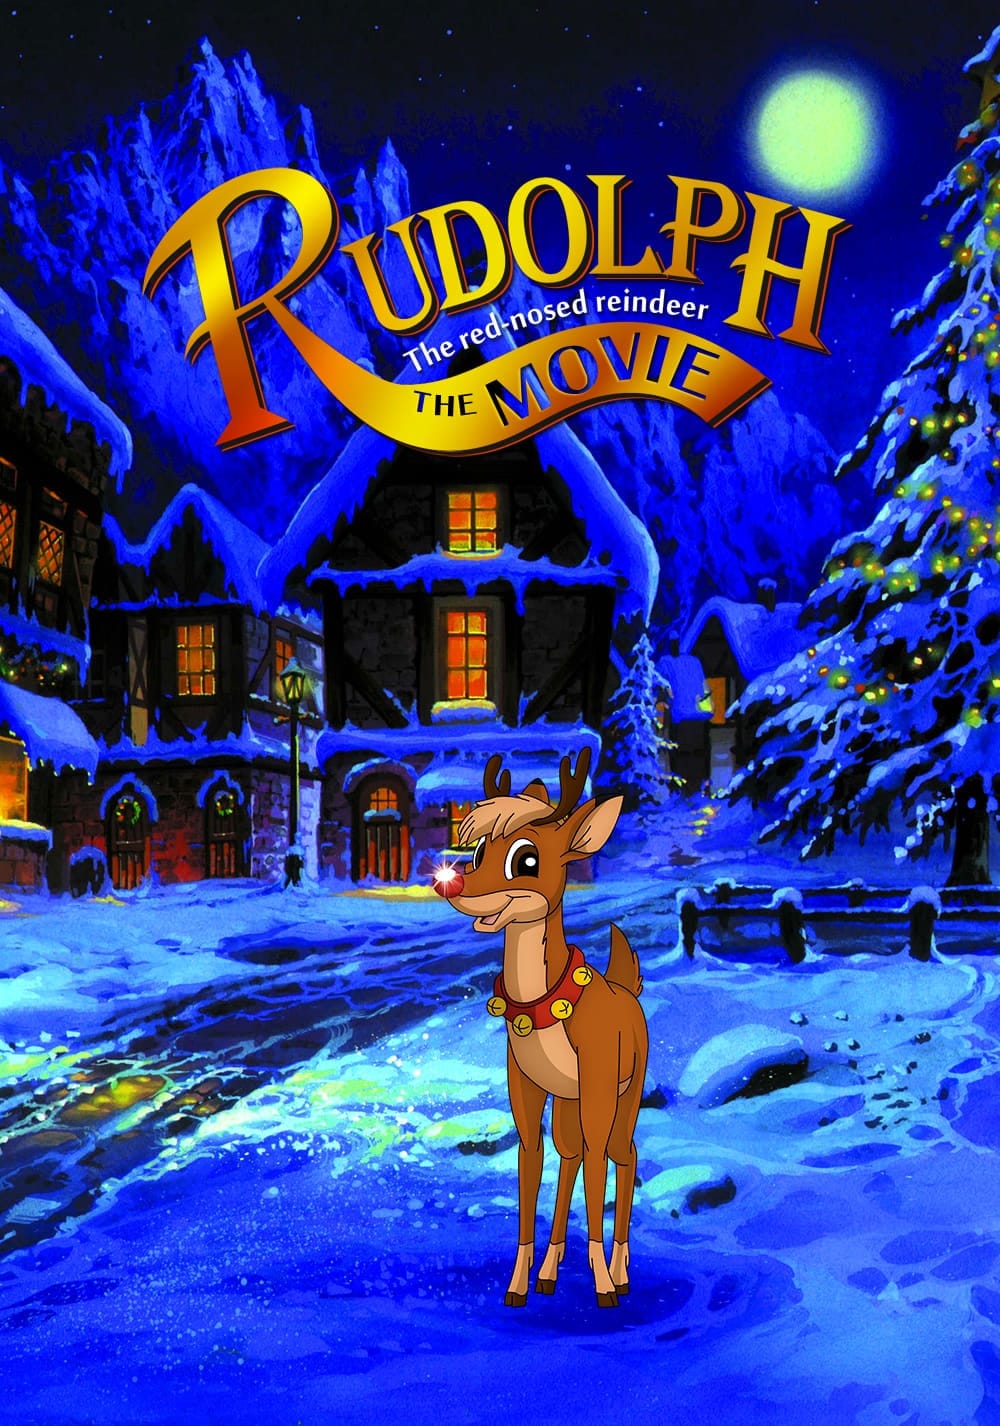 Rudolph The Red Nosed Reindeer The Movie Full Movie Watch